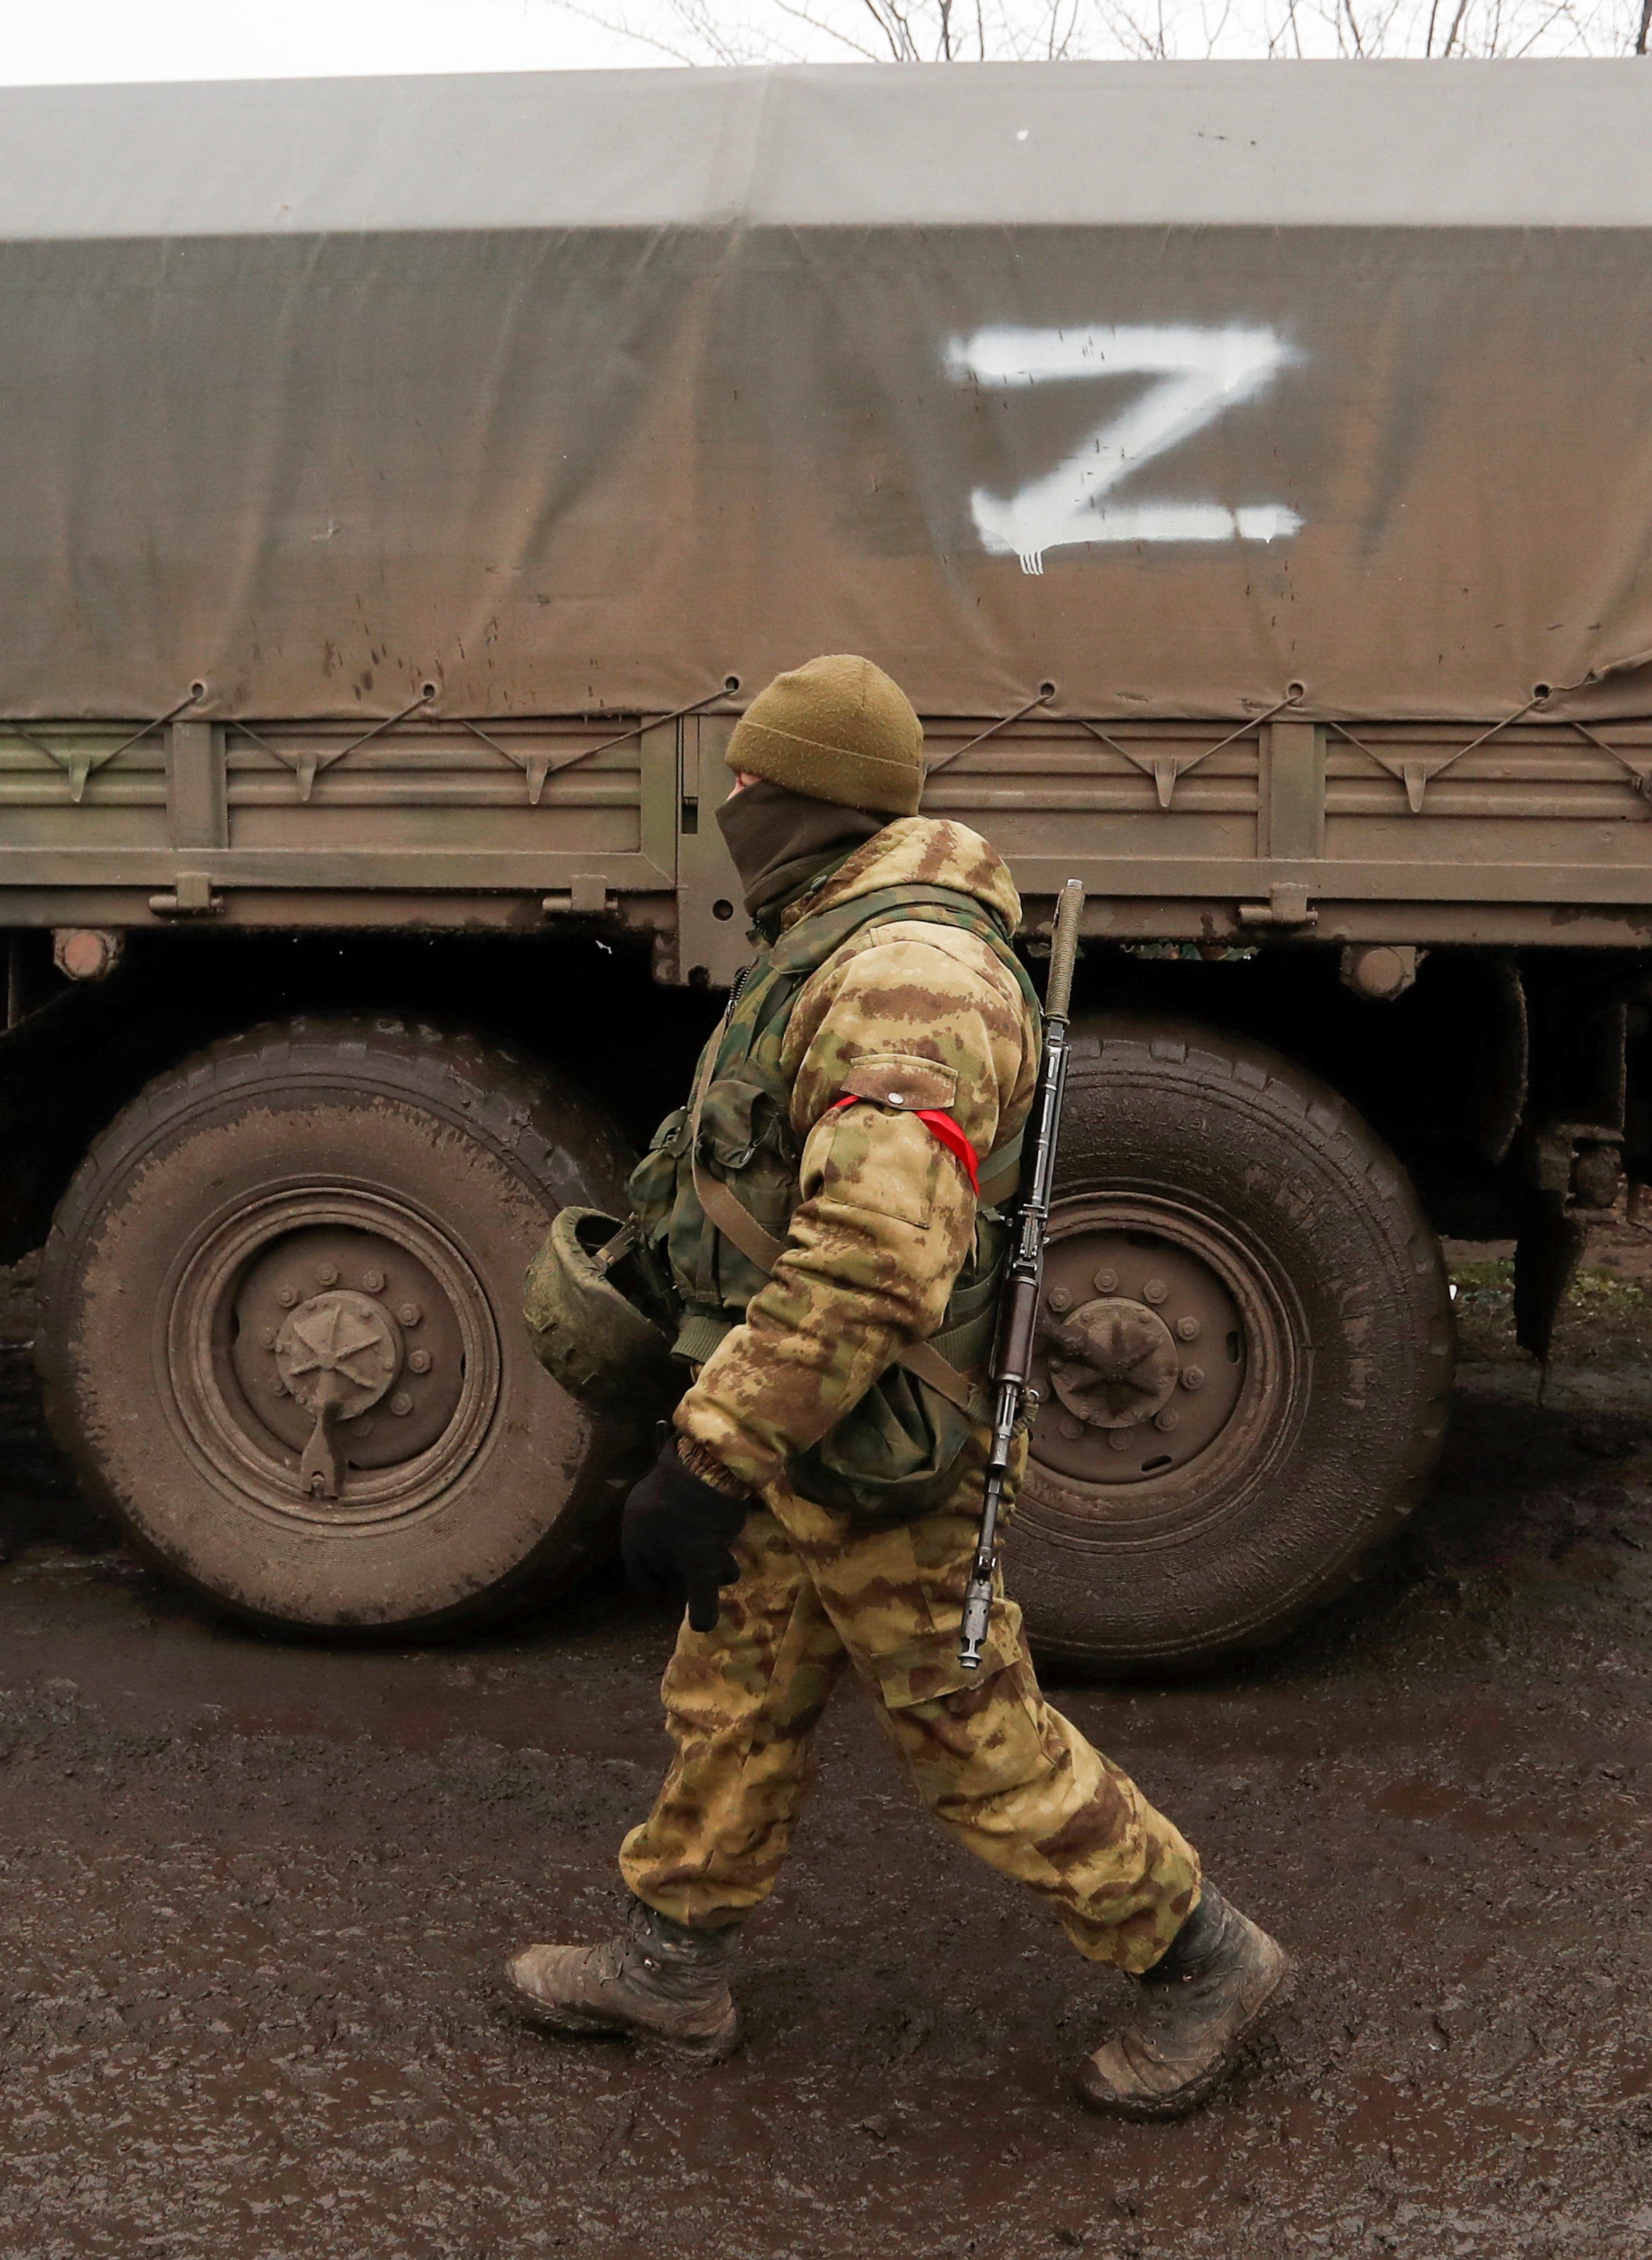 A service member of pro-Russian troops in a uniform without insignia walks past a truck with the symbol "Z" painted on its side in the separatist-controlled settlement of Rybinskoye during Ukraine-Russia conflict in the Donetsk region, Ukraine, on 5 March